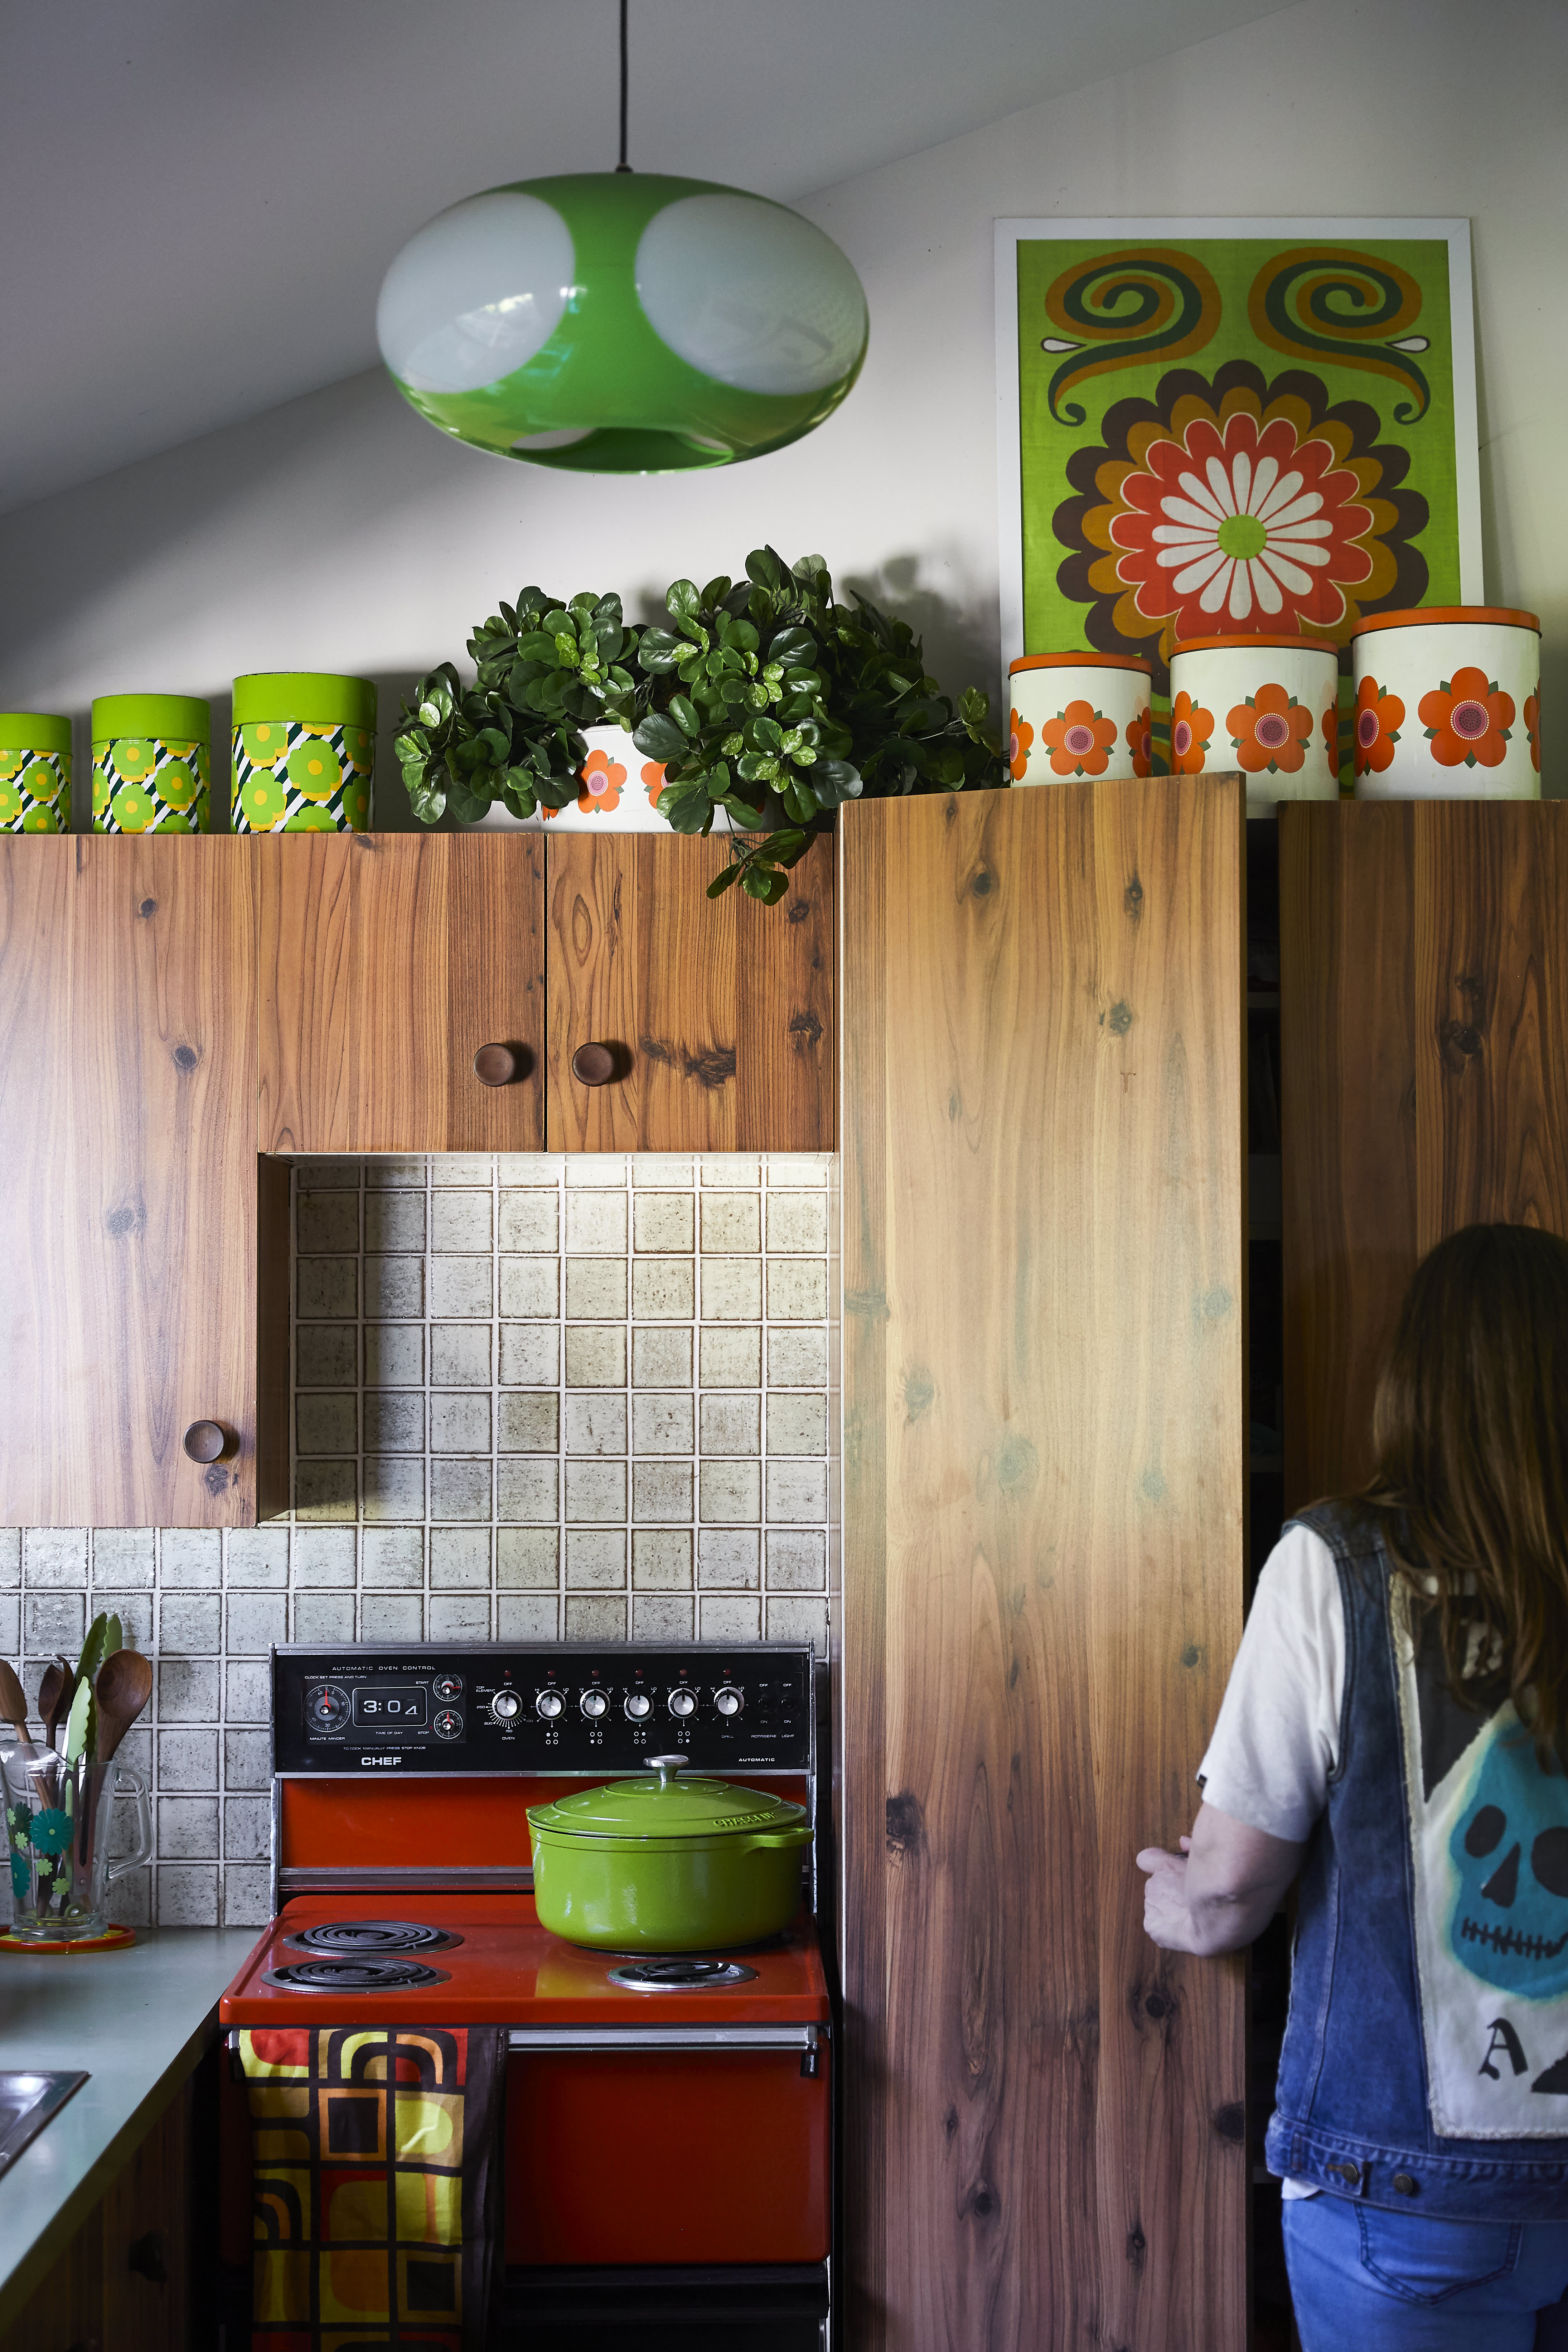 How to add Modern Retro Appliances to Any Kitchen Style